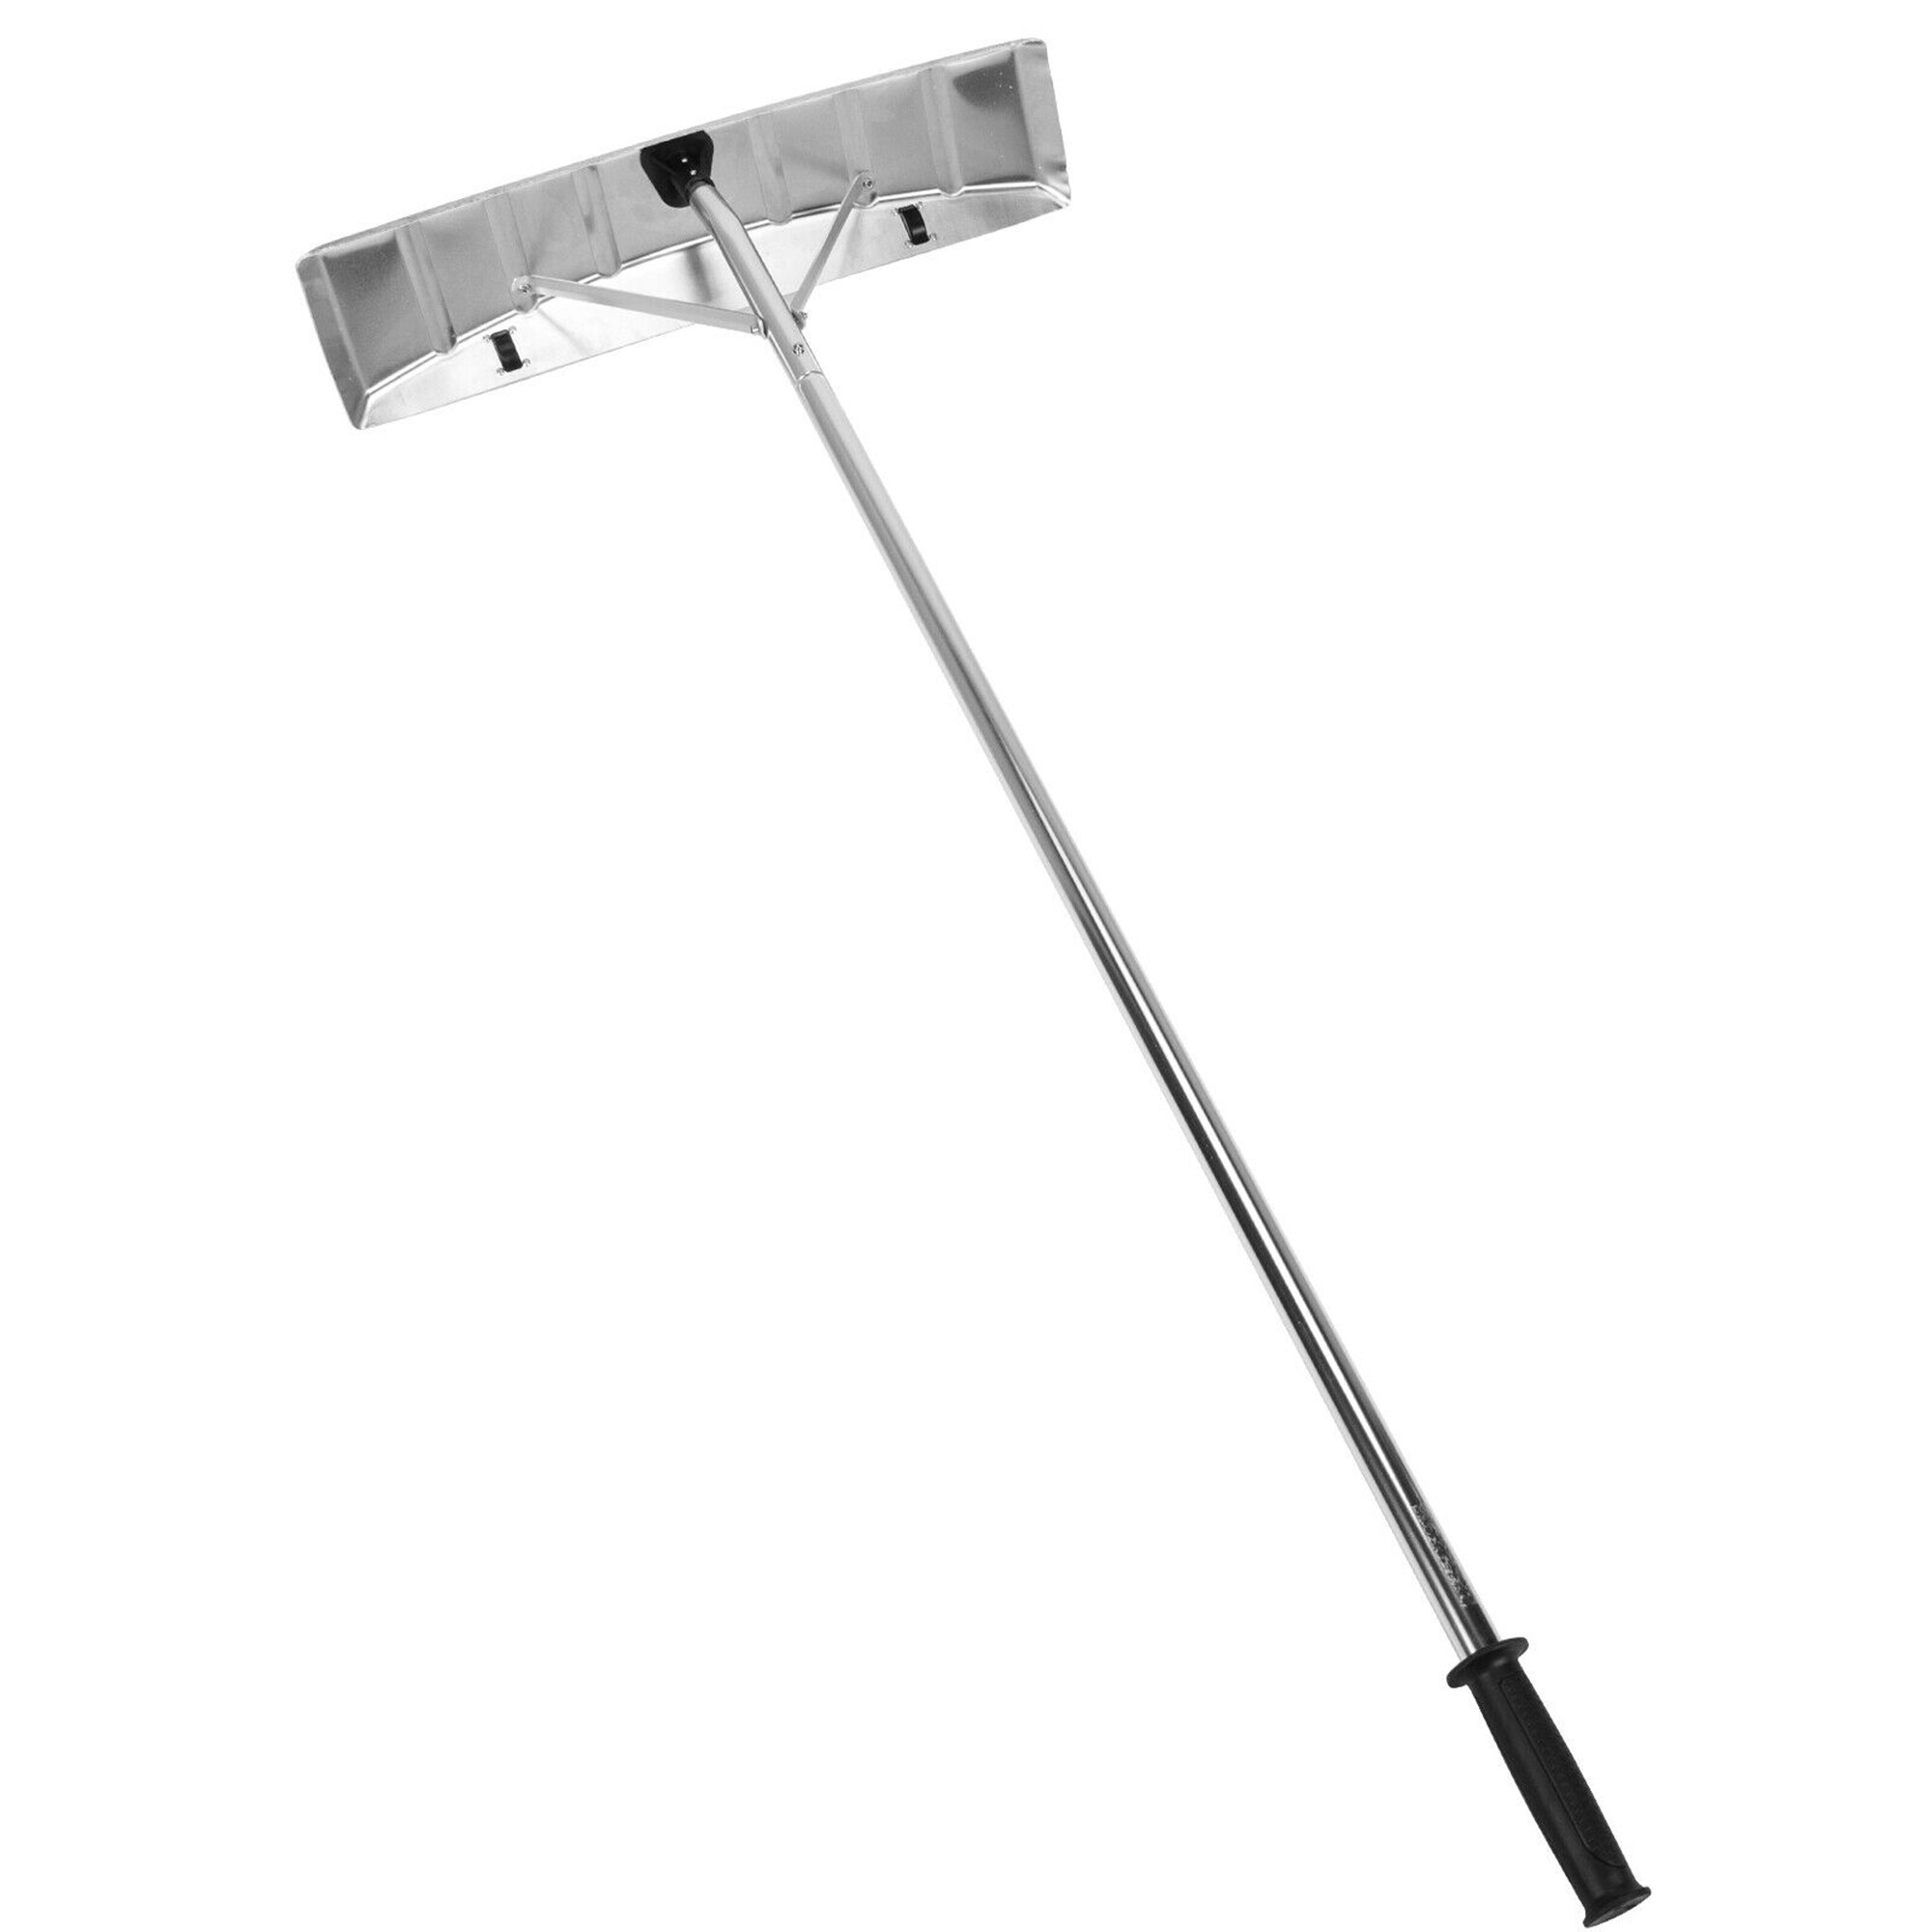 Gymax 20FT Snow Roof Rake Reinforced Aluminum Snow Removal Tool for